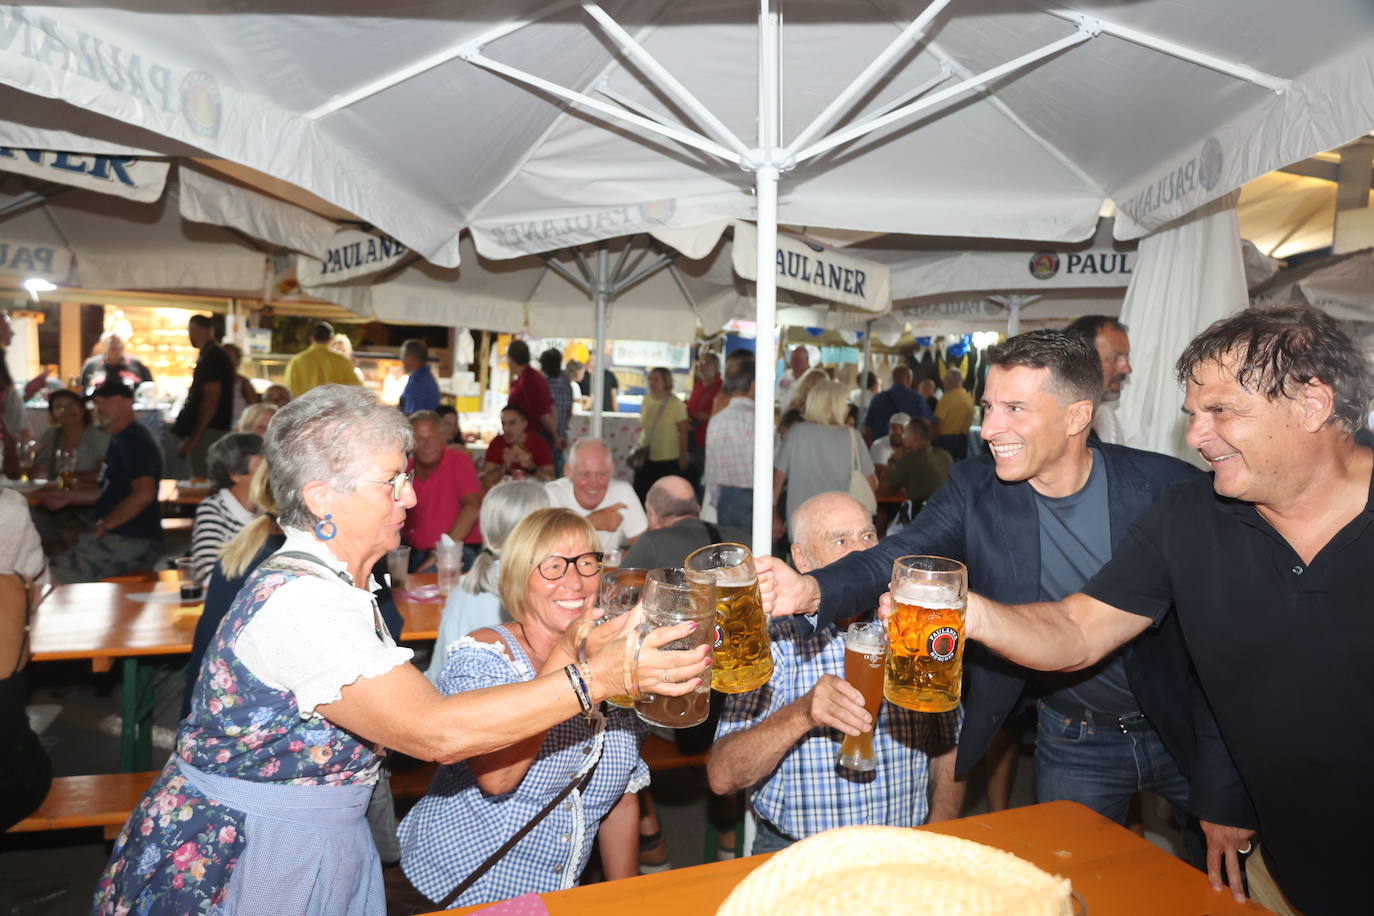 More than 500 people attended the first night of the Oktoberfest event in Torrox.